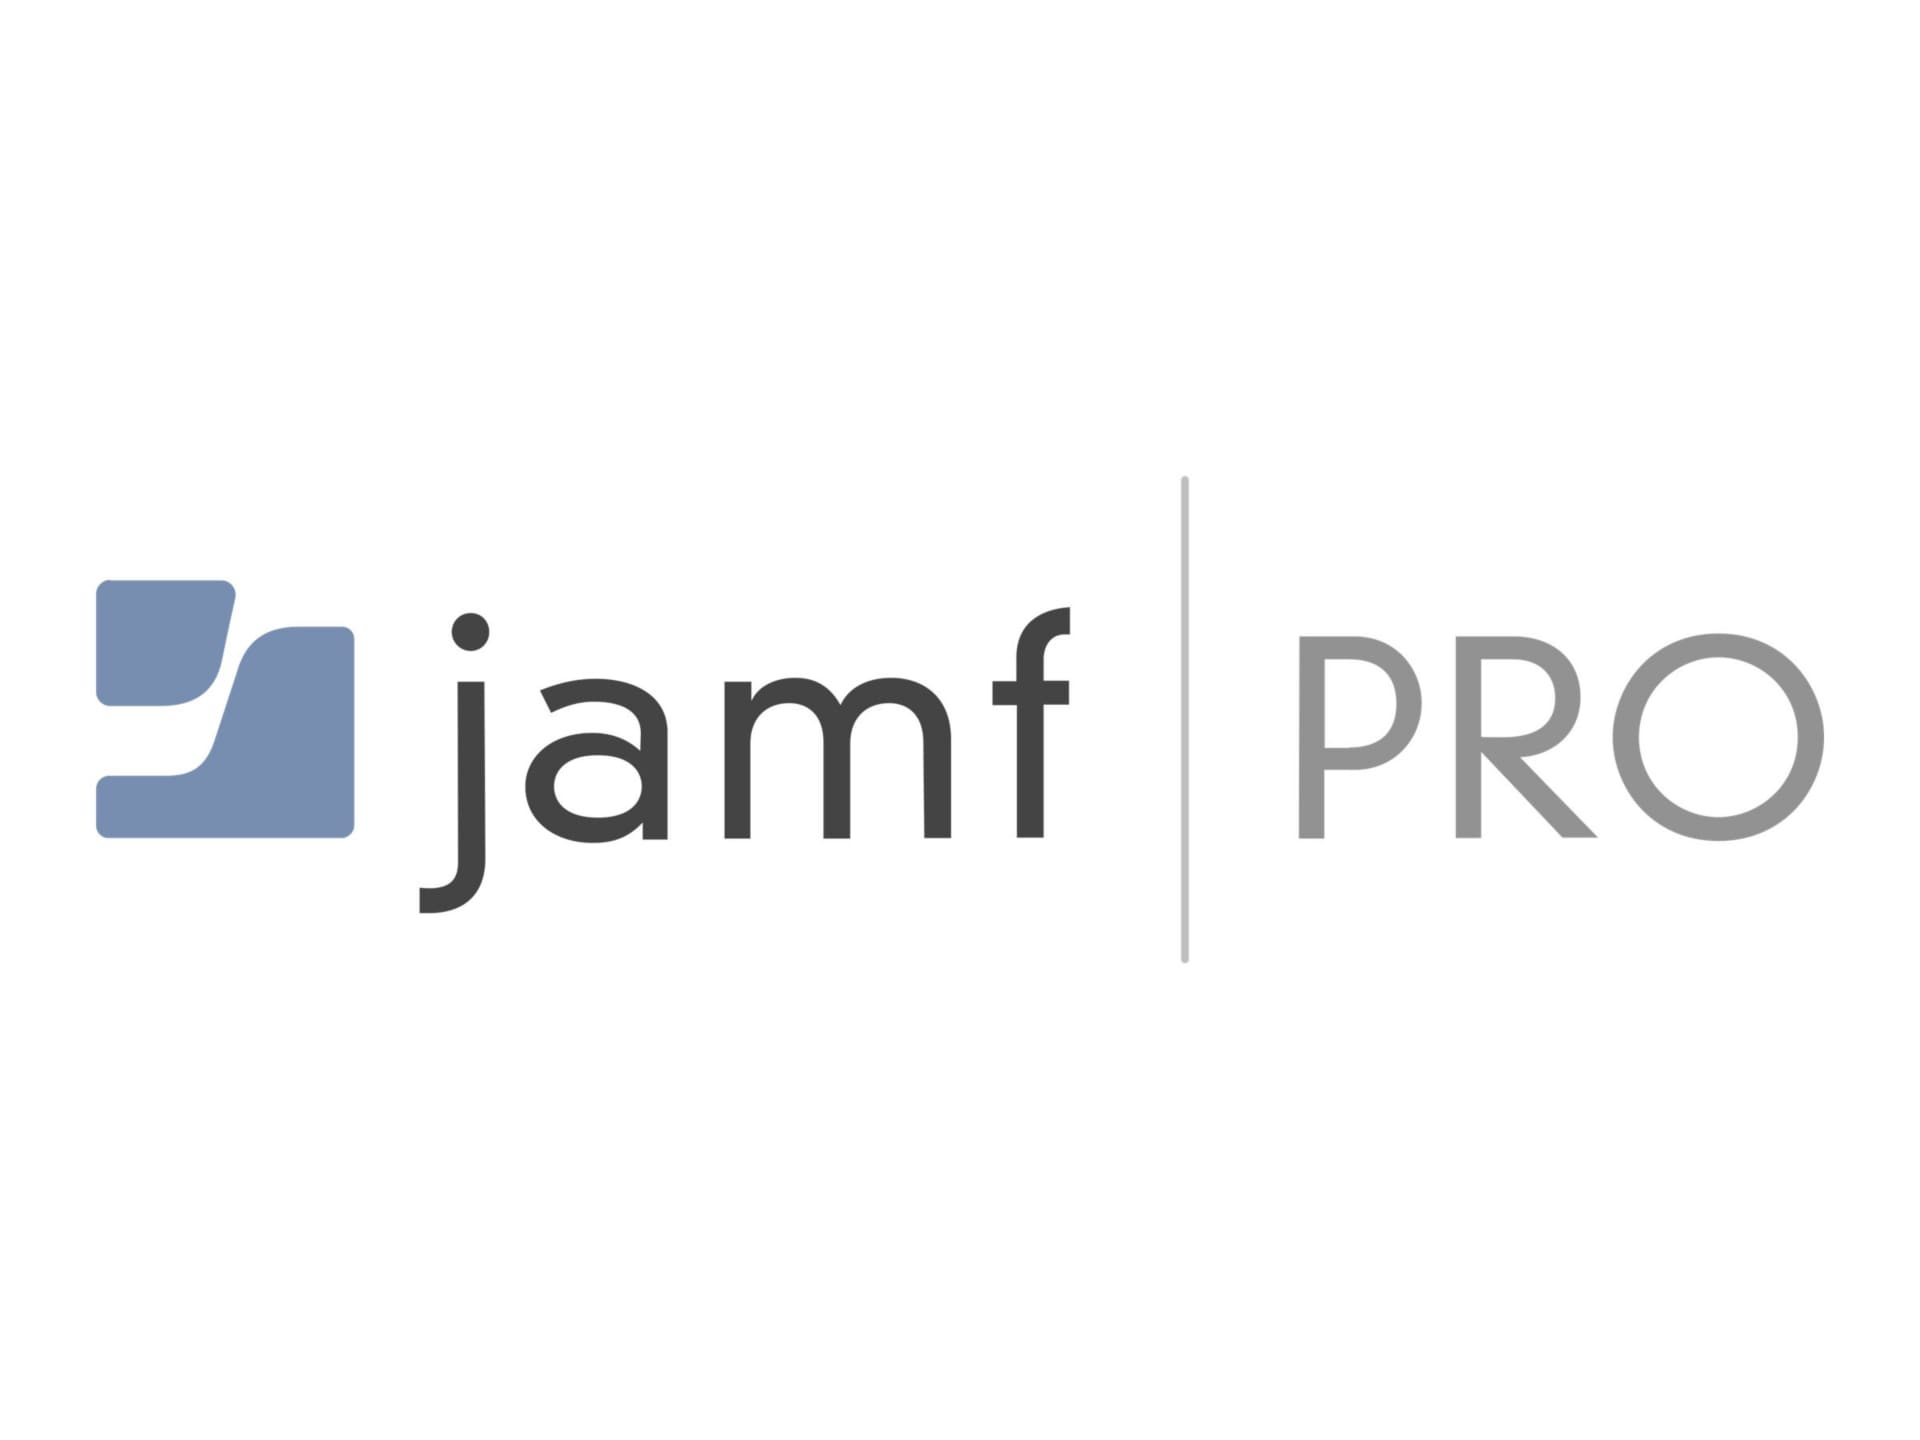 JAMF PRO for tvOS - On-Premise Term License renewal (annual) - 1 tvOS device